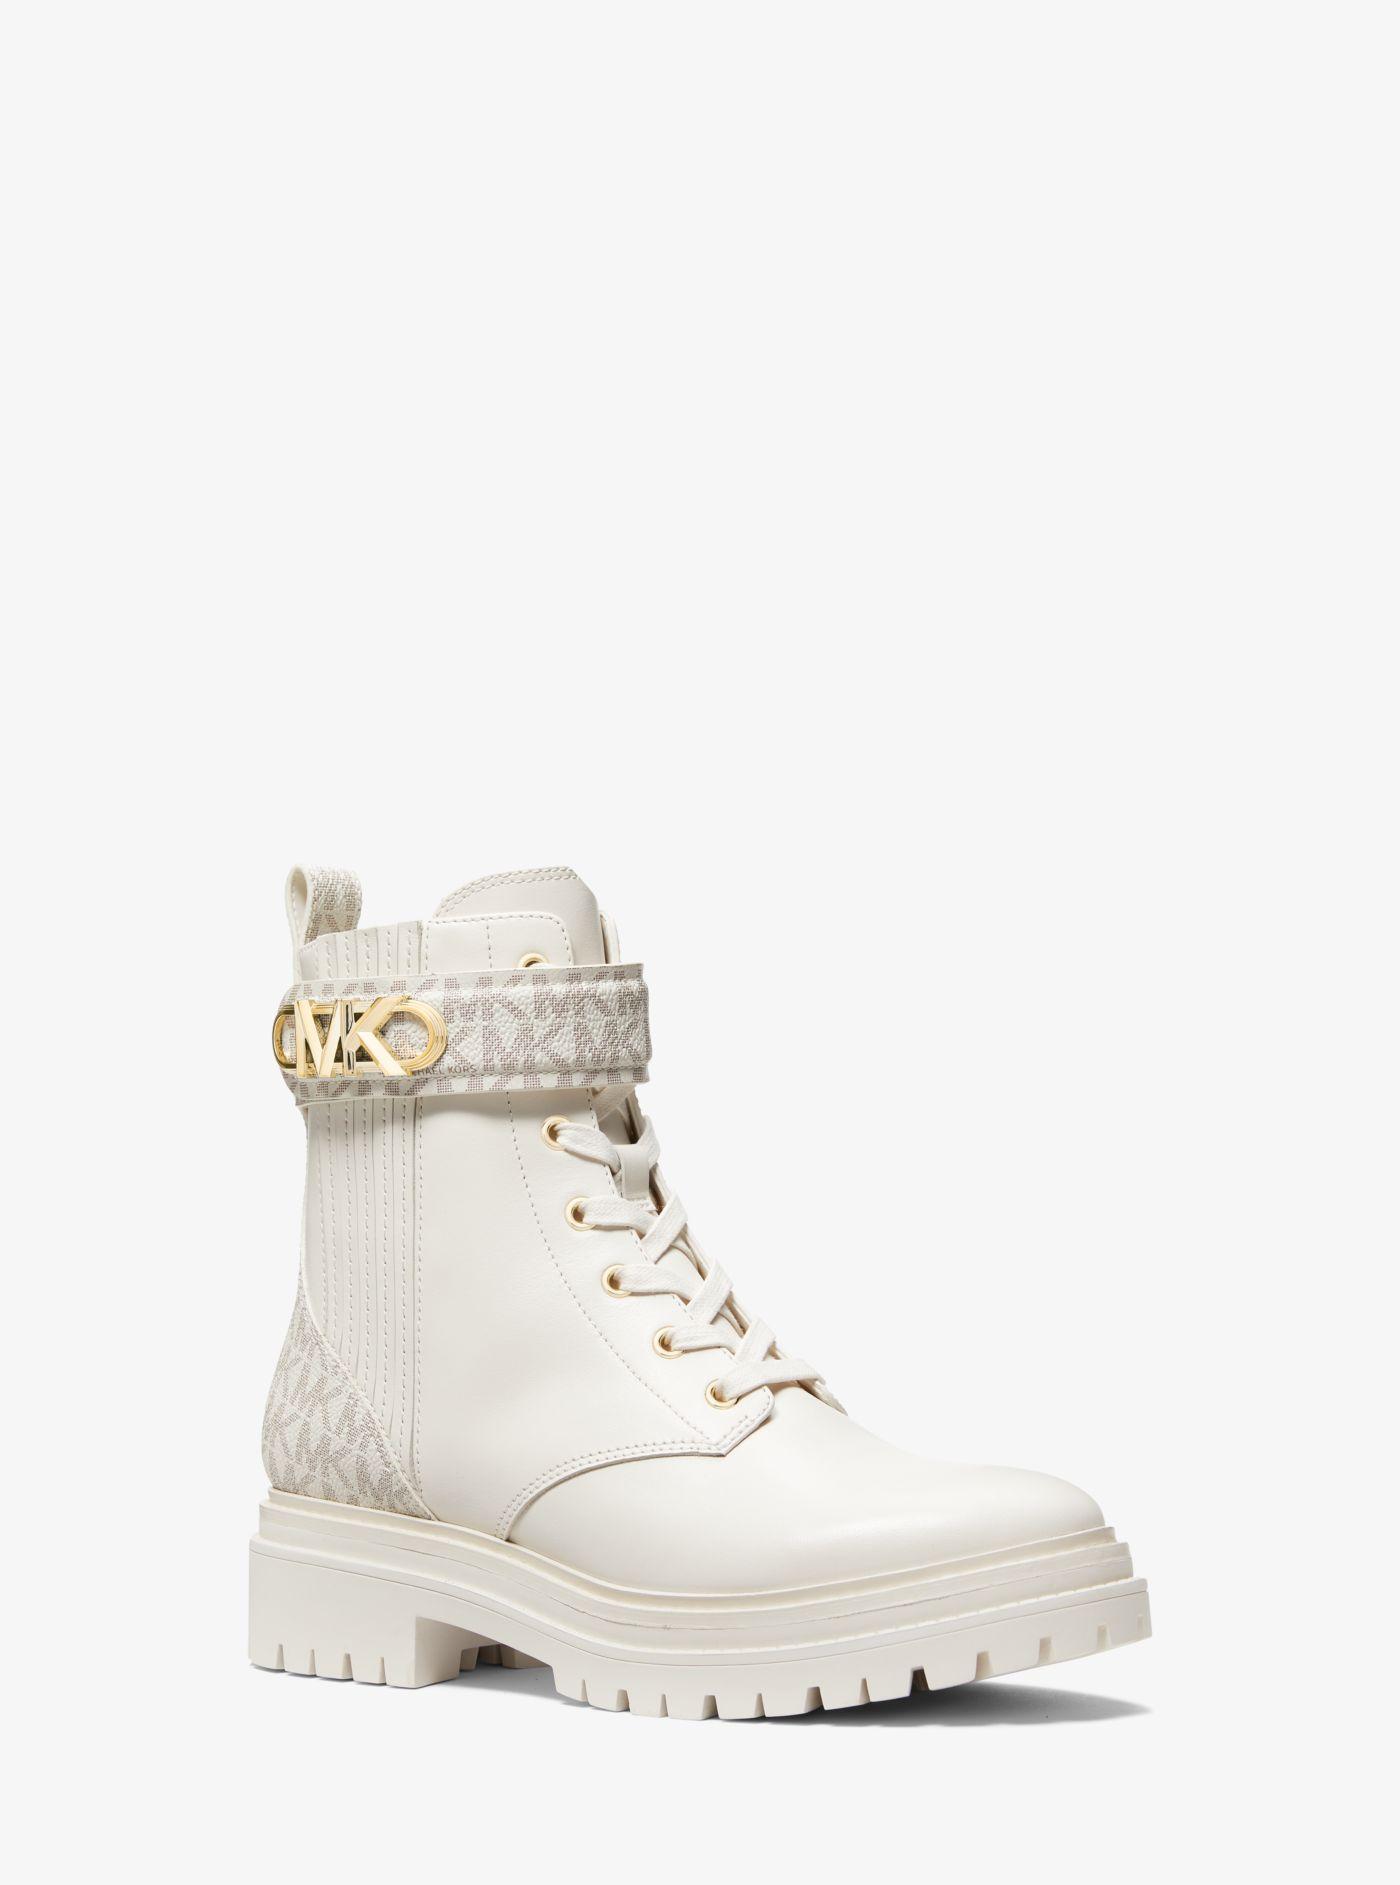 MICHAEL Michael Kors Parker Leather Combat Boot in White | Lyst